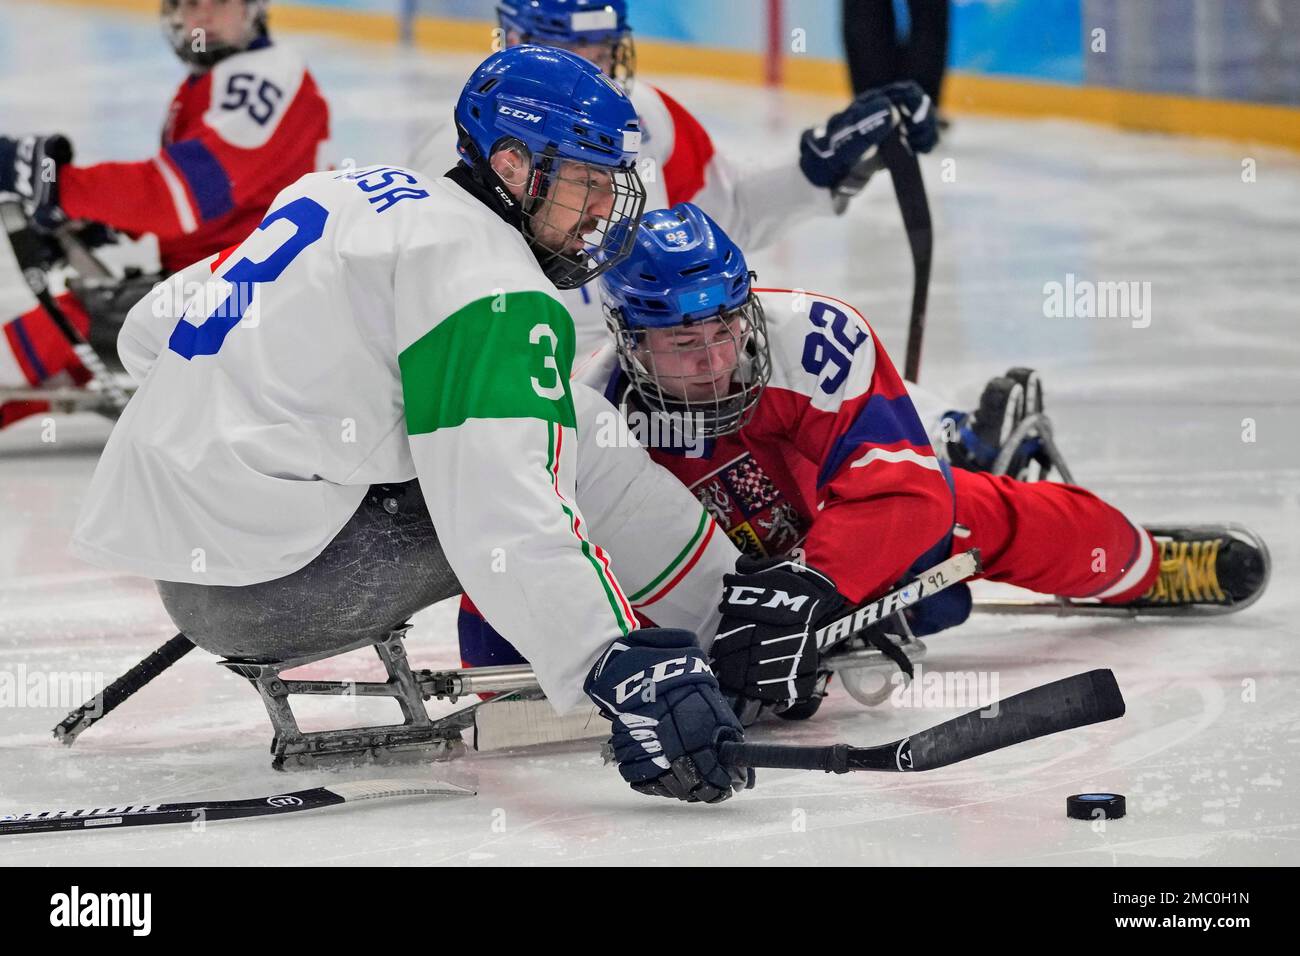 Italy's Gianluigi Rosa, left, battles for the puck against Czech Republic's  Patrik Sedlacek during their para ice hockey match for the fifth place at  the 2022 Winter Paralympics, Friday, March 11, 2022,